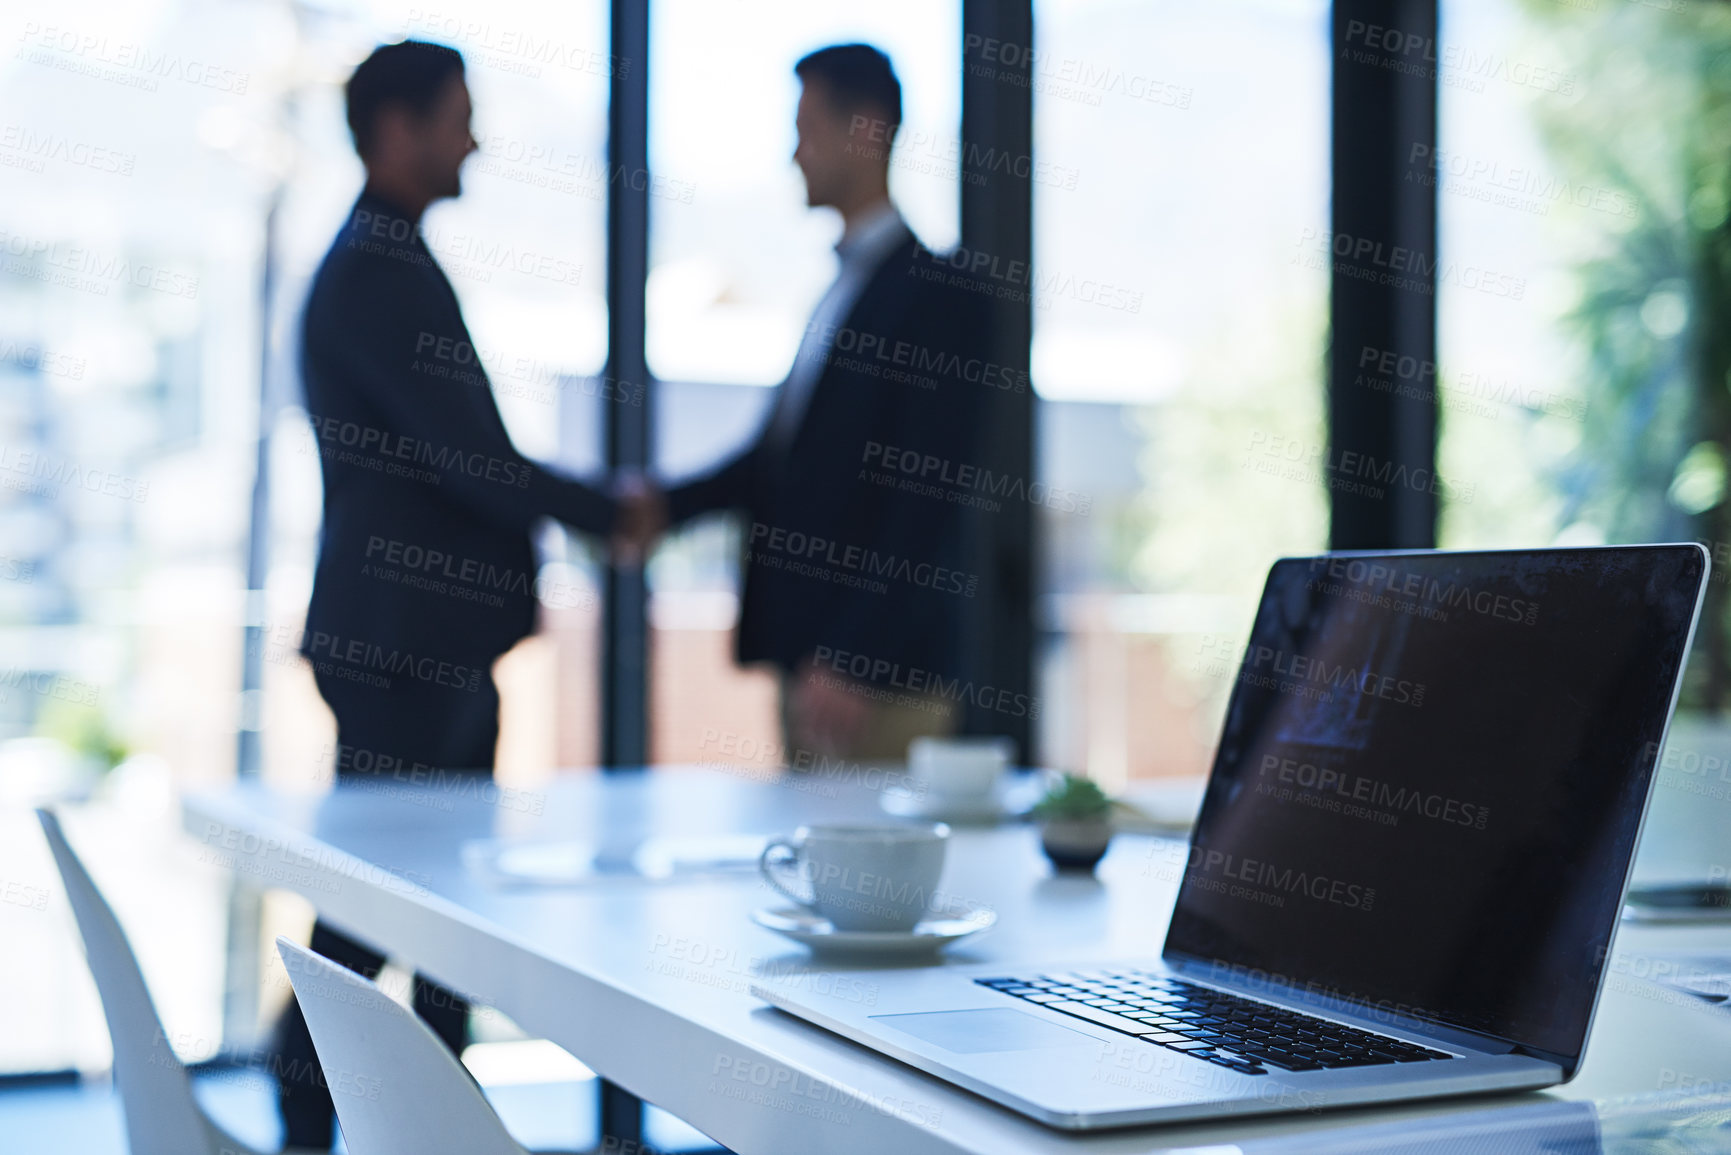 Buy stock photo Shot of a laptop on a table in an office with two businessmen shaking hands in the background